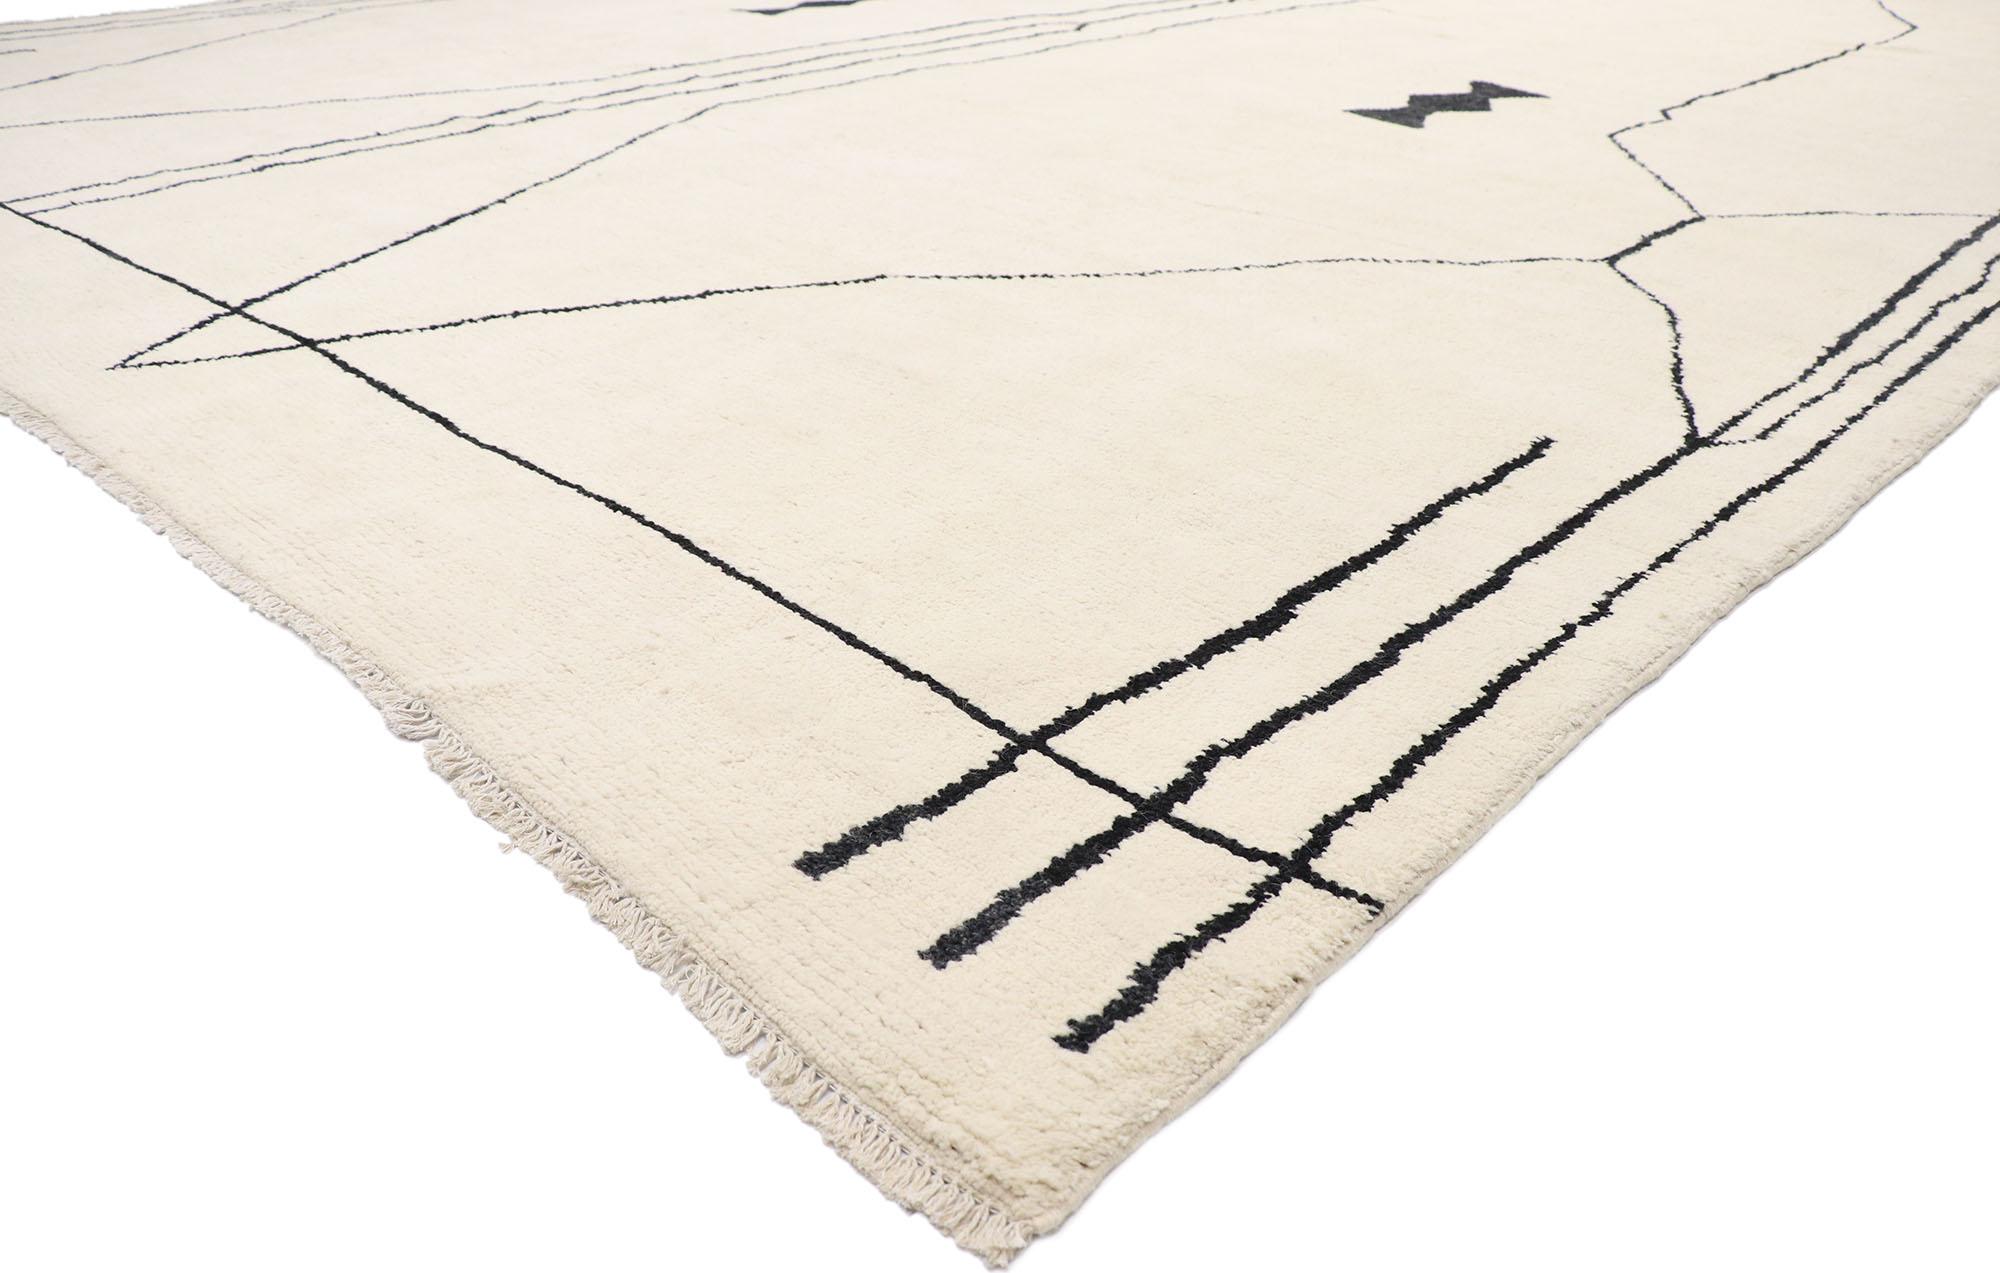 80656, new contemporary oversized Moroccan style rug. This hand knotted wool contemporary Moroccan style rug with line art design features contrasting black lines running the length of the ivory backdrop and dotted with two black organic shapes,